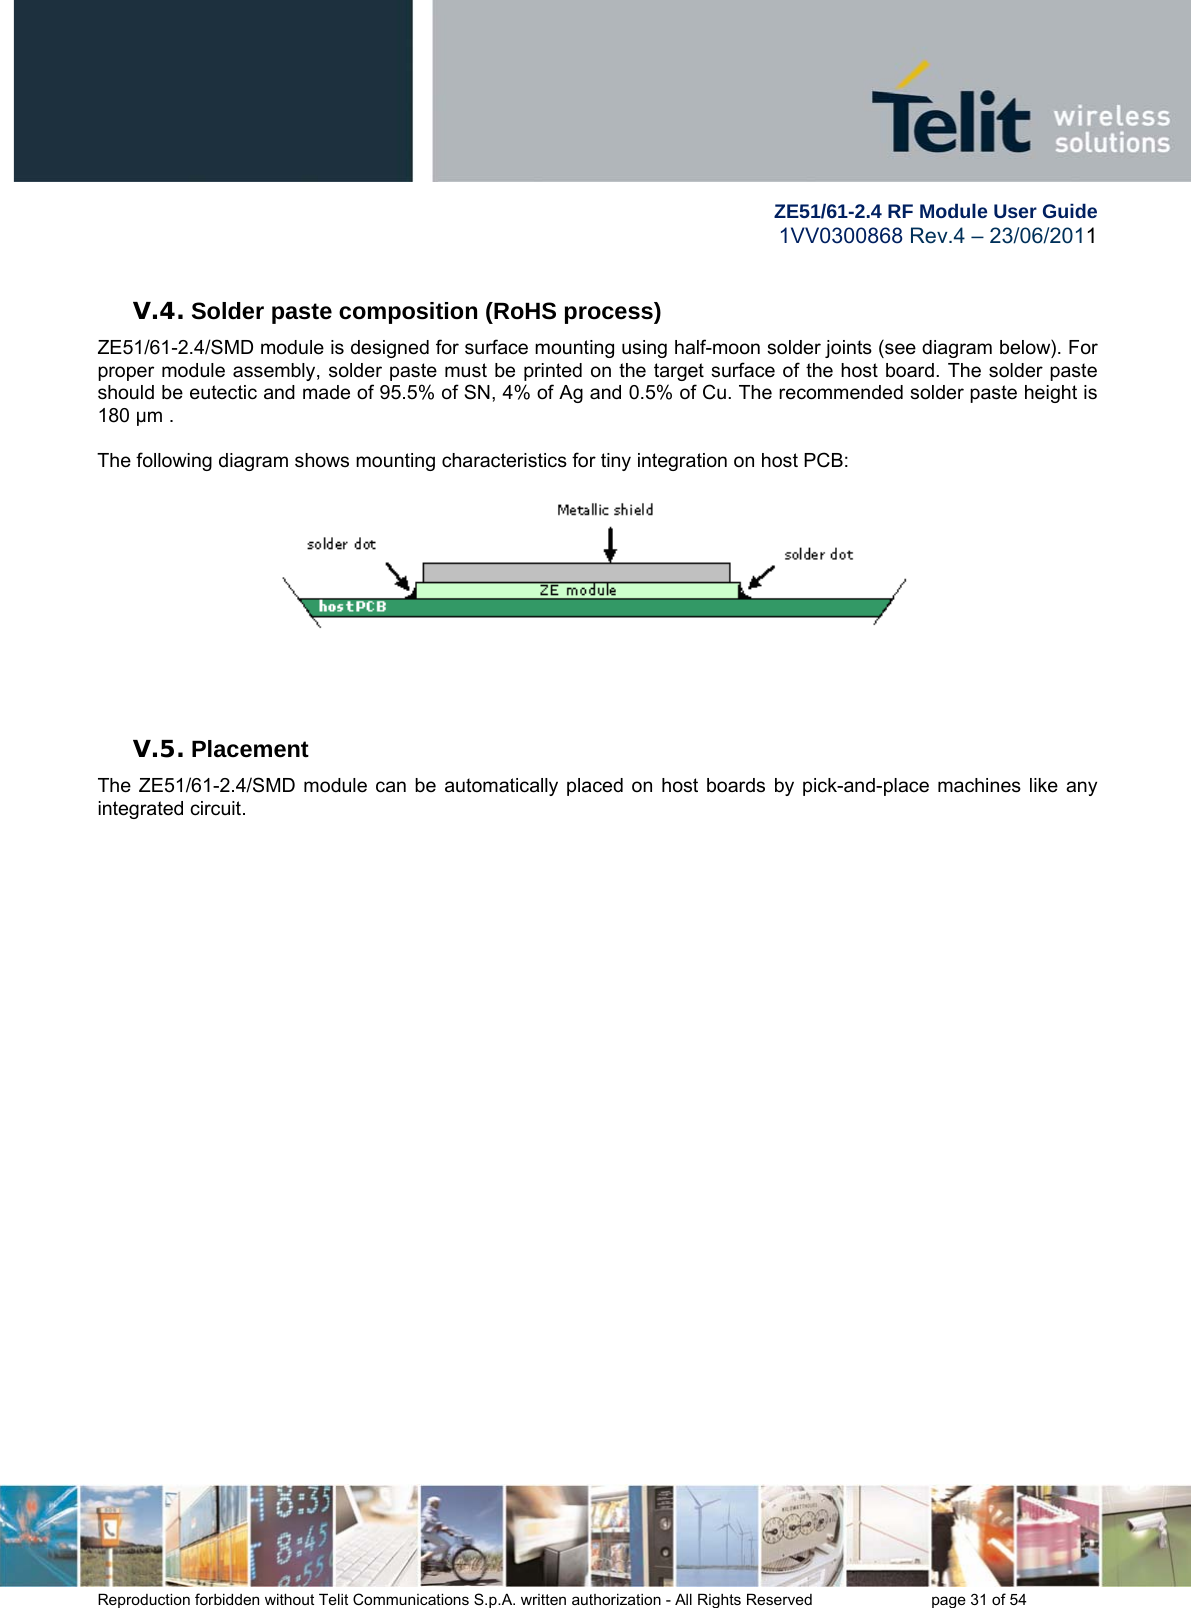        ZE51/61-2.4 RF Module User Guide 1VV0300868 Rev.4 – 23/06/2011 Reproduction forbidden without Telit Communications S.p.A. written authorization - All Rights Reserved    page 31 of 54  V.4. Solder paste composition (RoHS process) ZE51/61-2.4/SMD module is designed for surface mounting using half-moon solder joints (see diagram below). For proper module assembly, solder paste must be printed on the target surface of the host board. The solder paste should be eutectic and made of 95.5% of SN, 4% of Ag and 0.5% of Cu. The recommended solder paste height is 180 μm .  The following diagram shows mounting characteristics for tiny integration on host PCB:      V.5. Placement The ZE51/61-2.4/SMD module can be automatically placed on host boards by pick-and-place machines like any integrated circuit.  